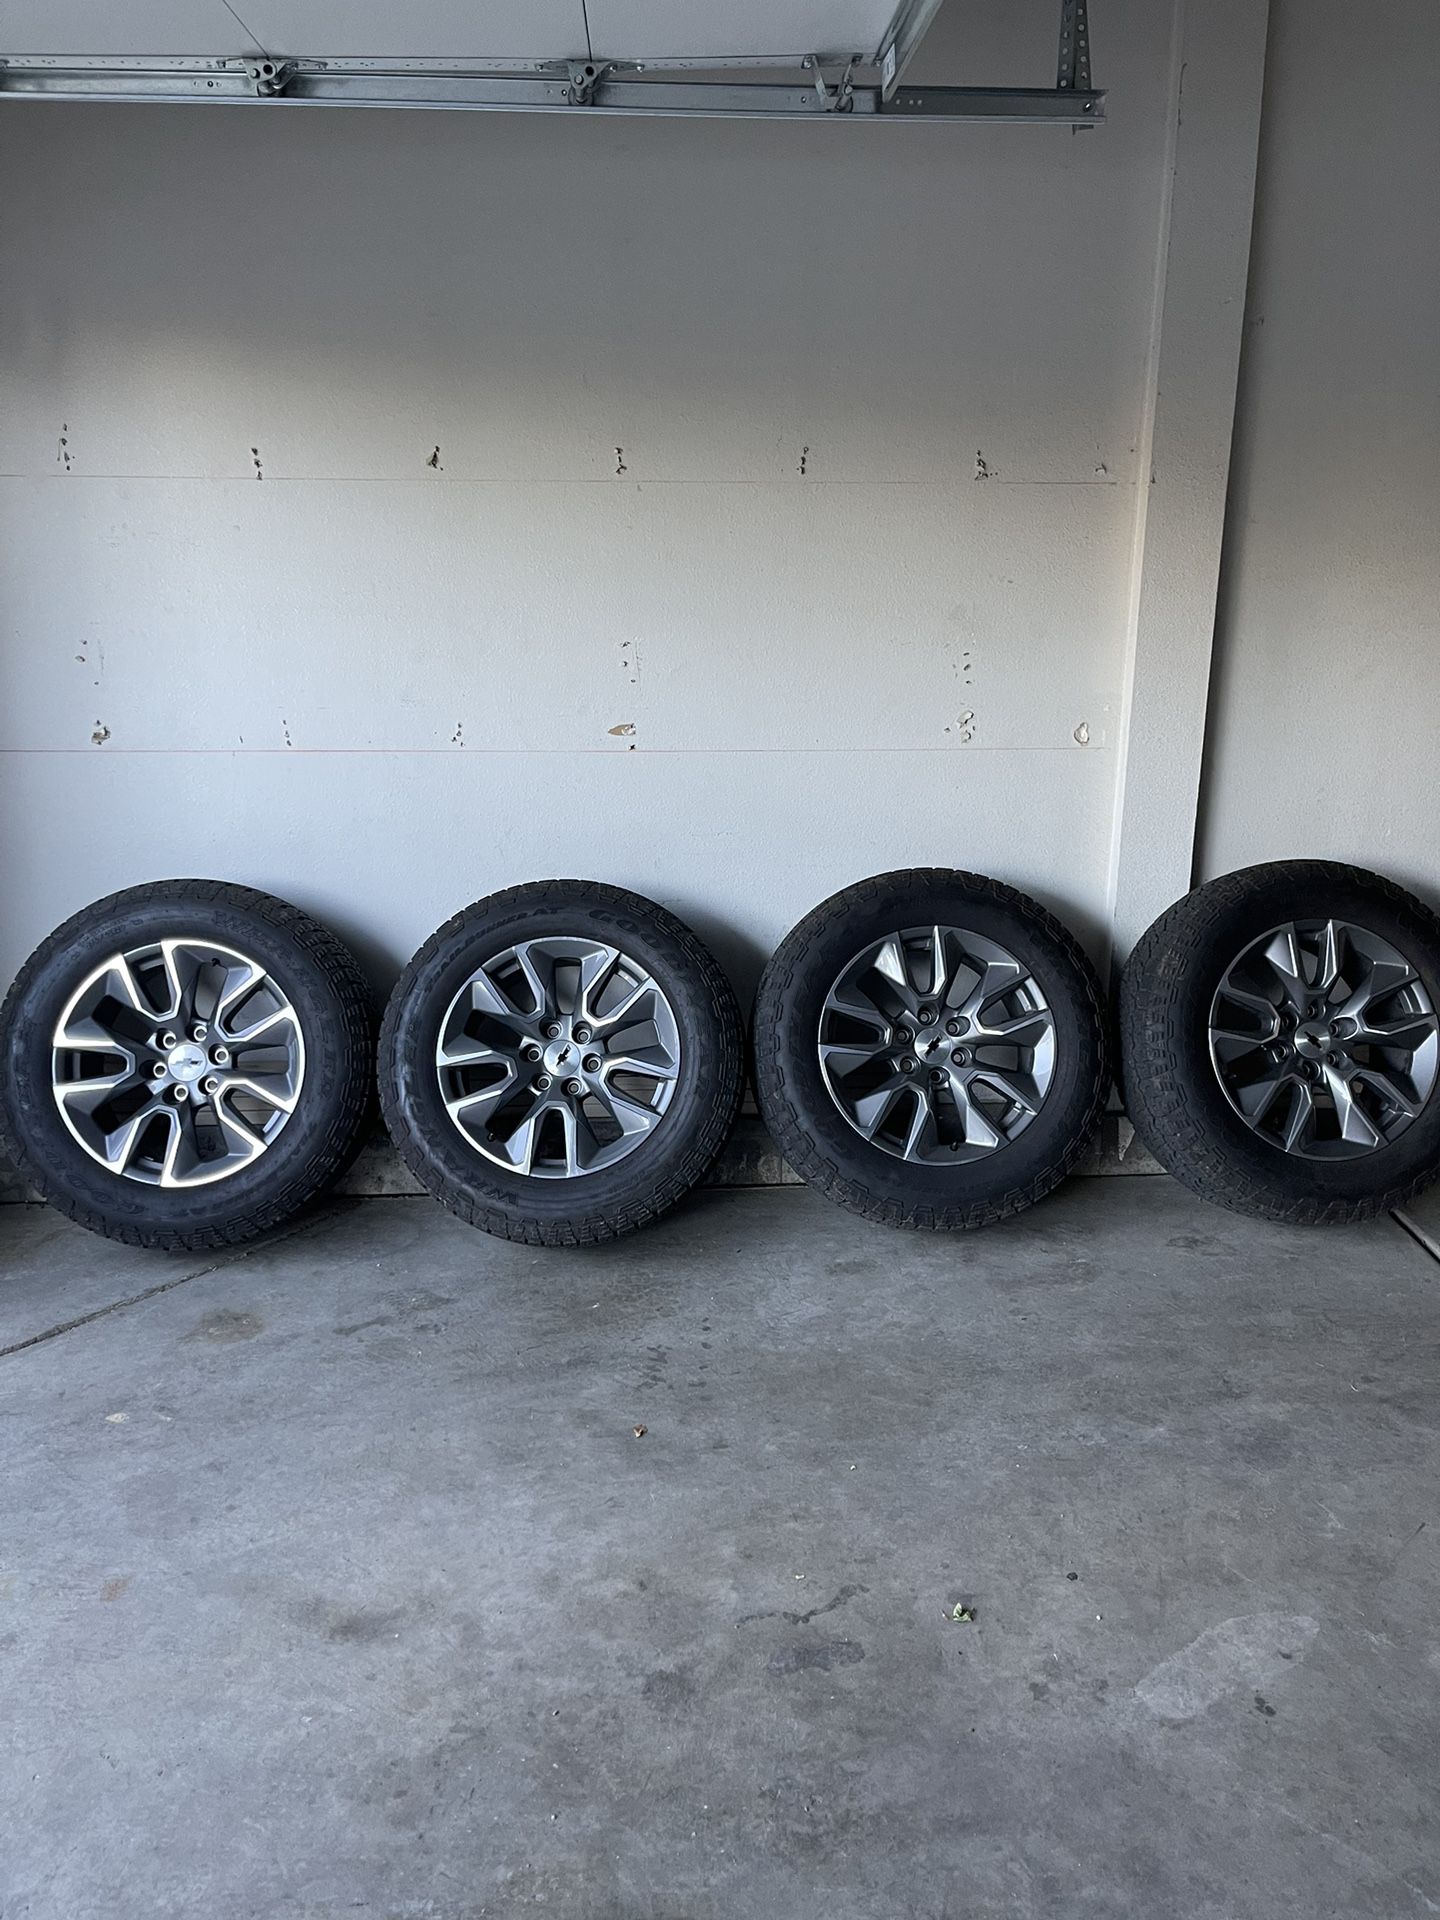 Wheels And Tires 20 Inch 